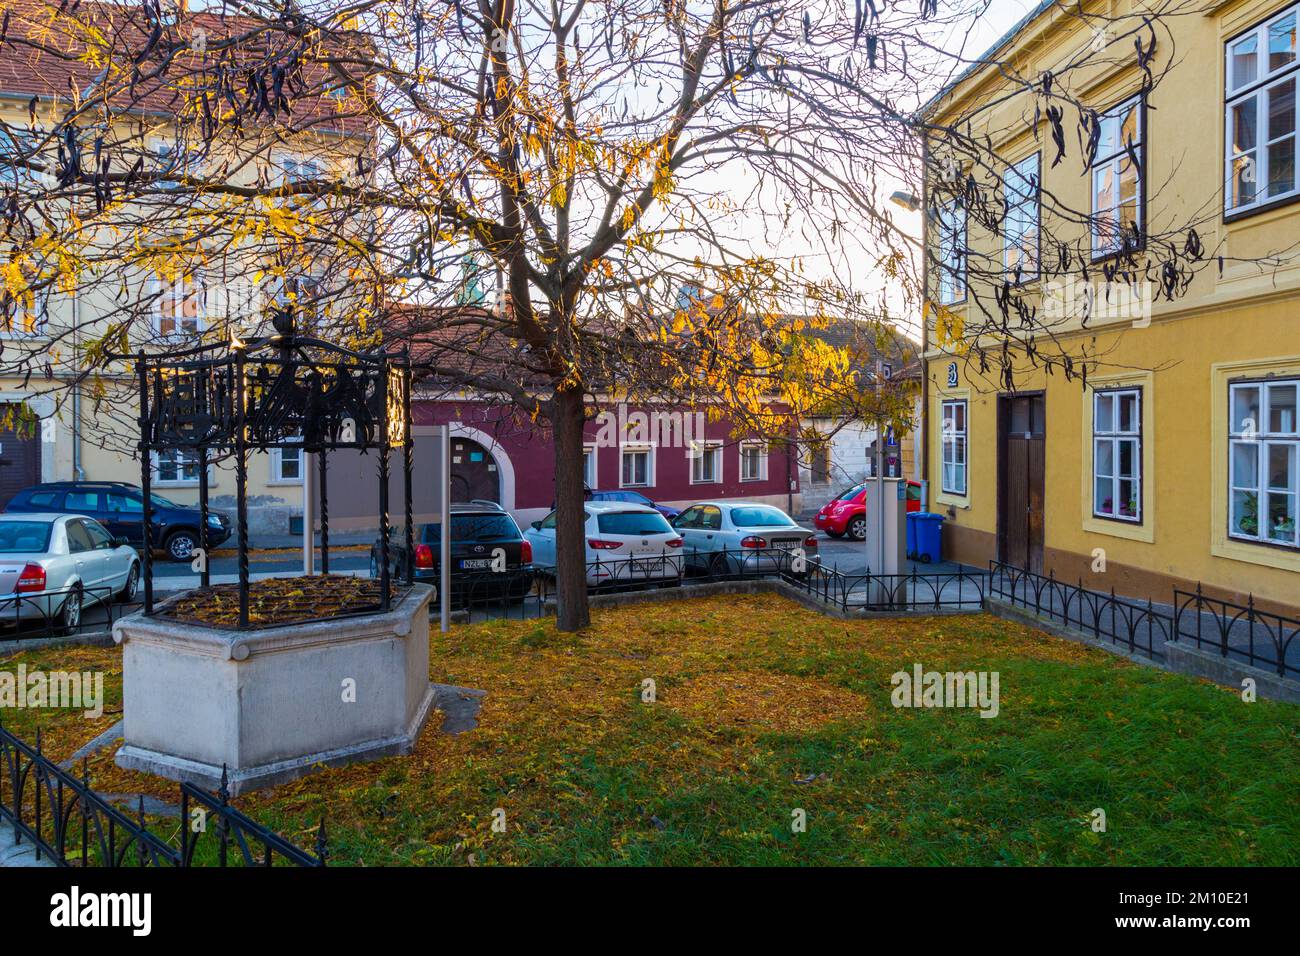 Wrought iron ornate well at Sas ter in autumn, Sopron, Hungary Stock Photo